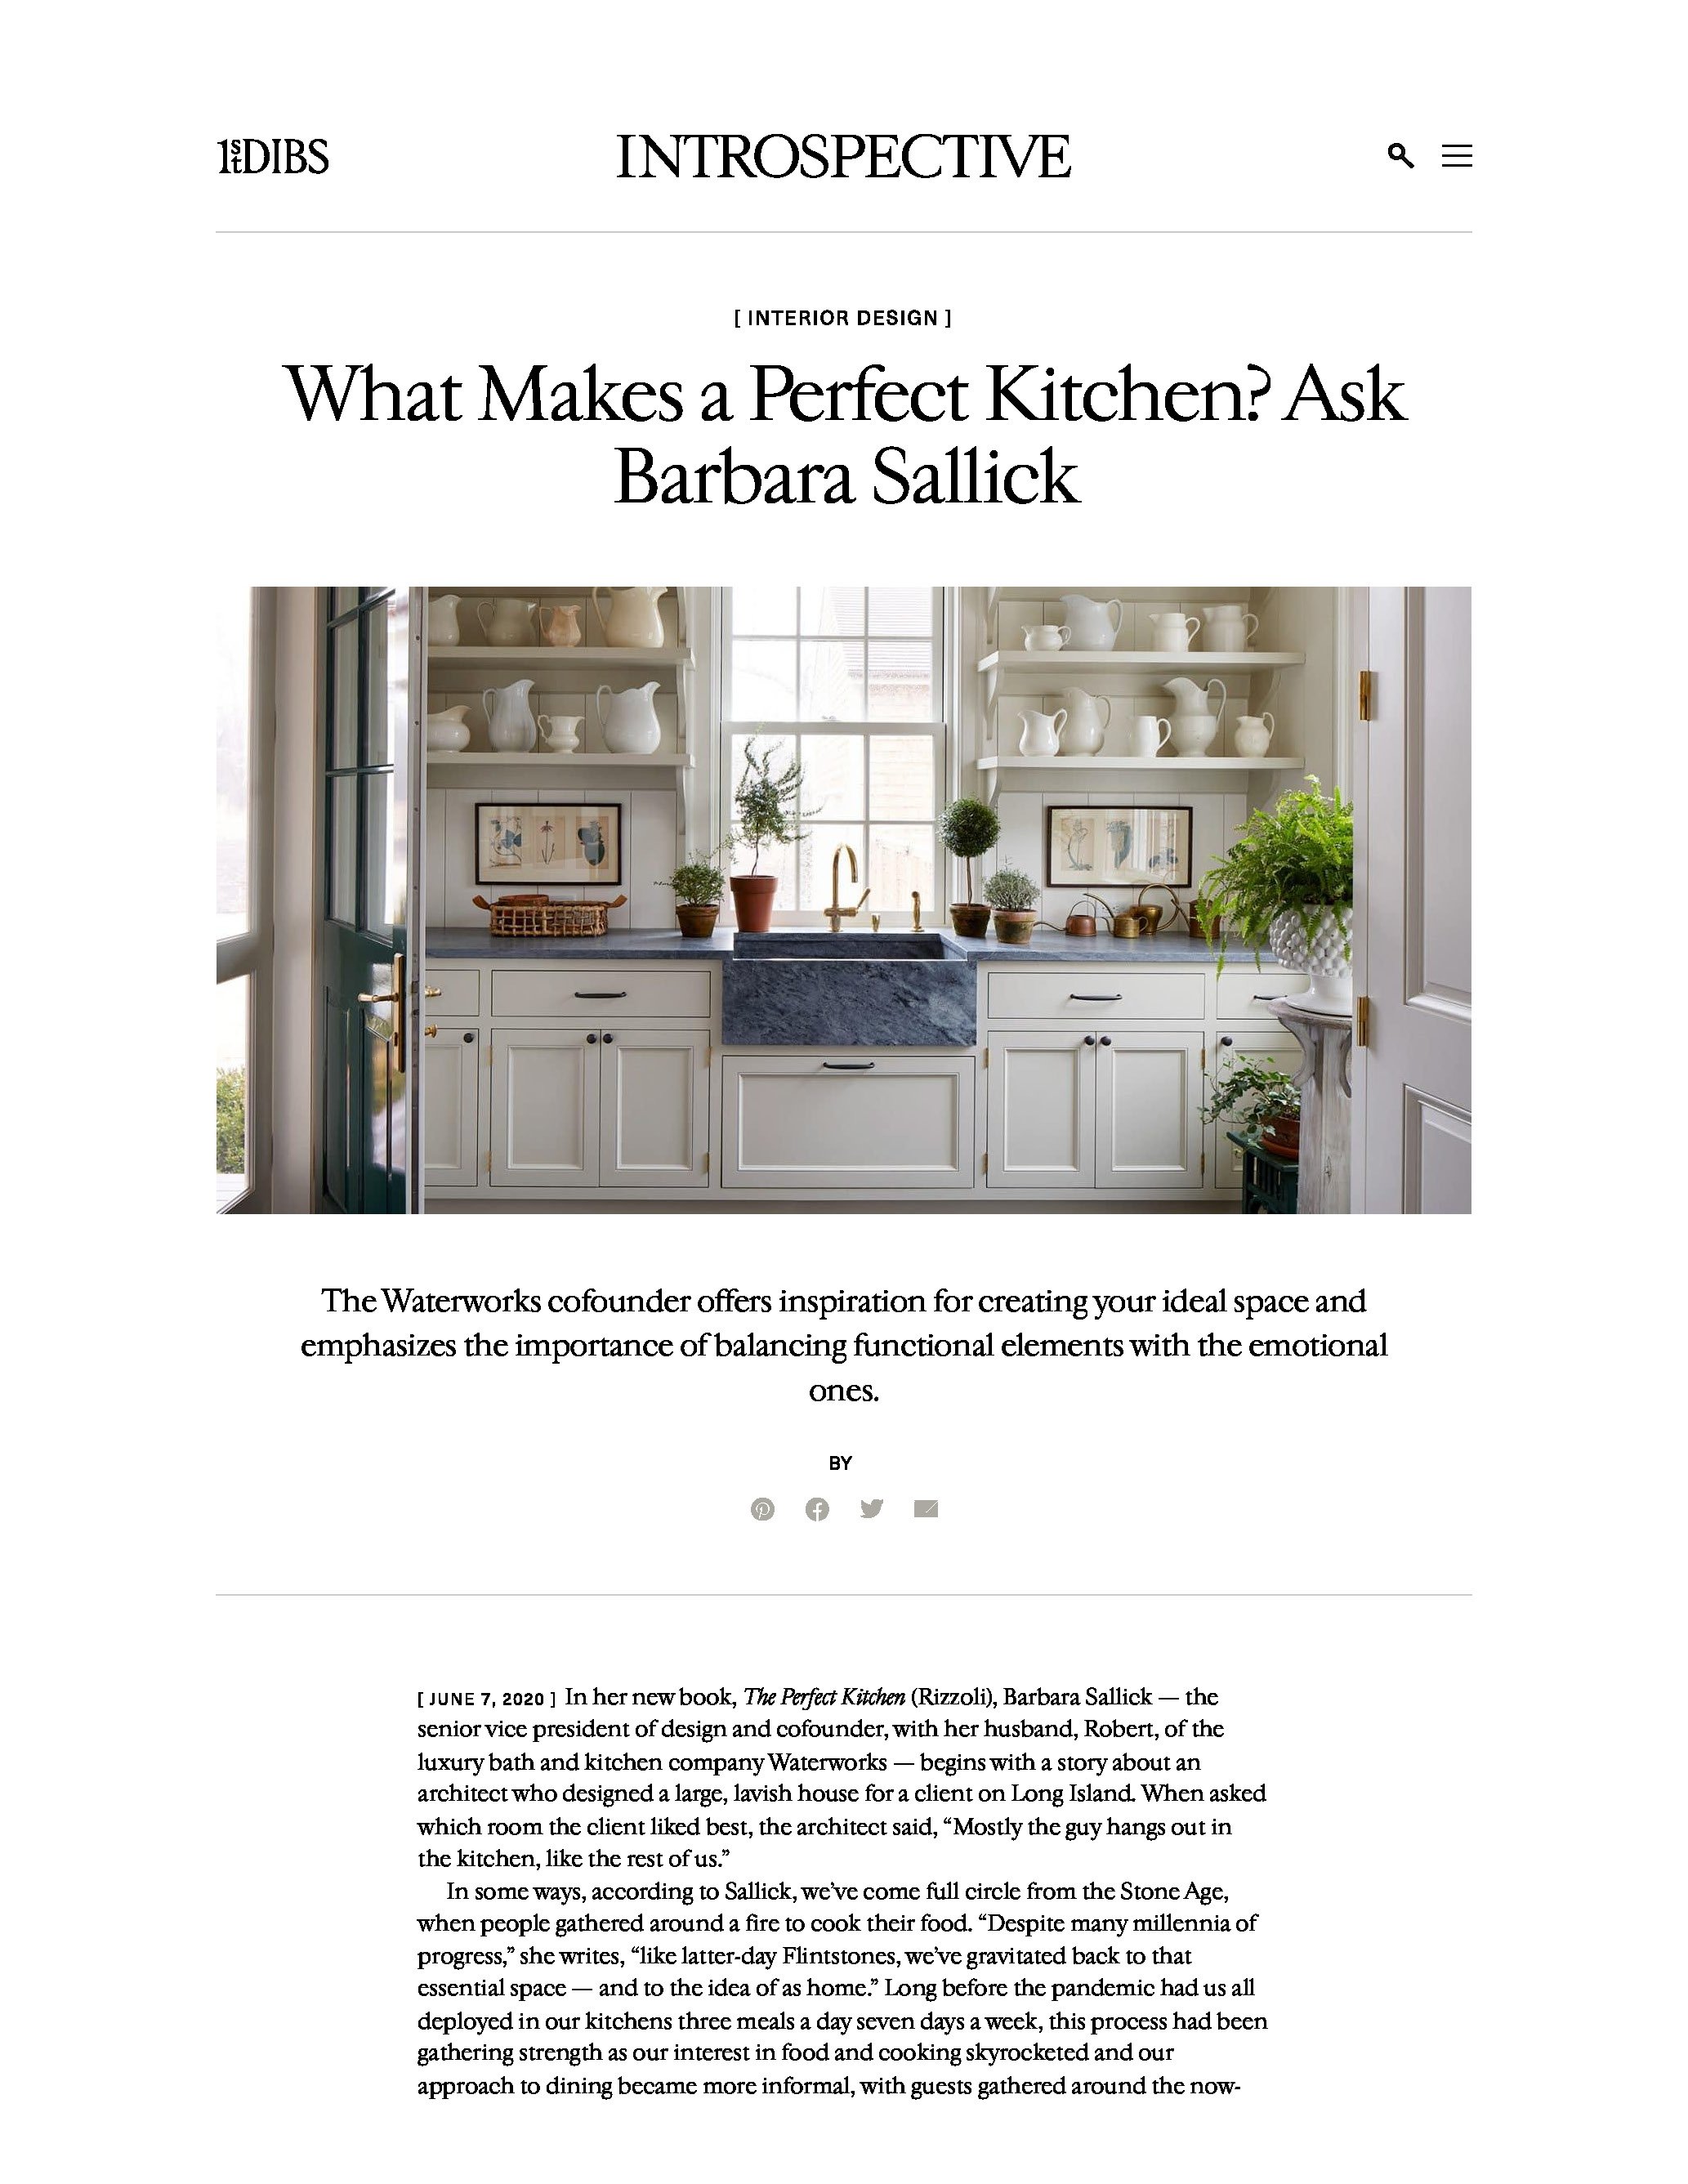 What Makes a Perfect Kitchen_ Ask Barbara Sallick - 1stDibs Introspective_Page_1.jpg